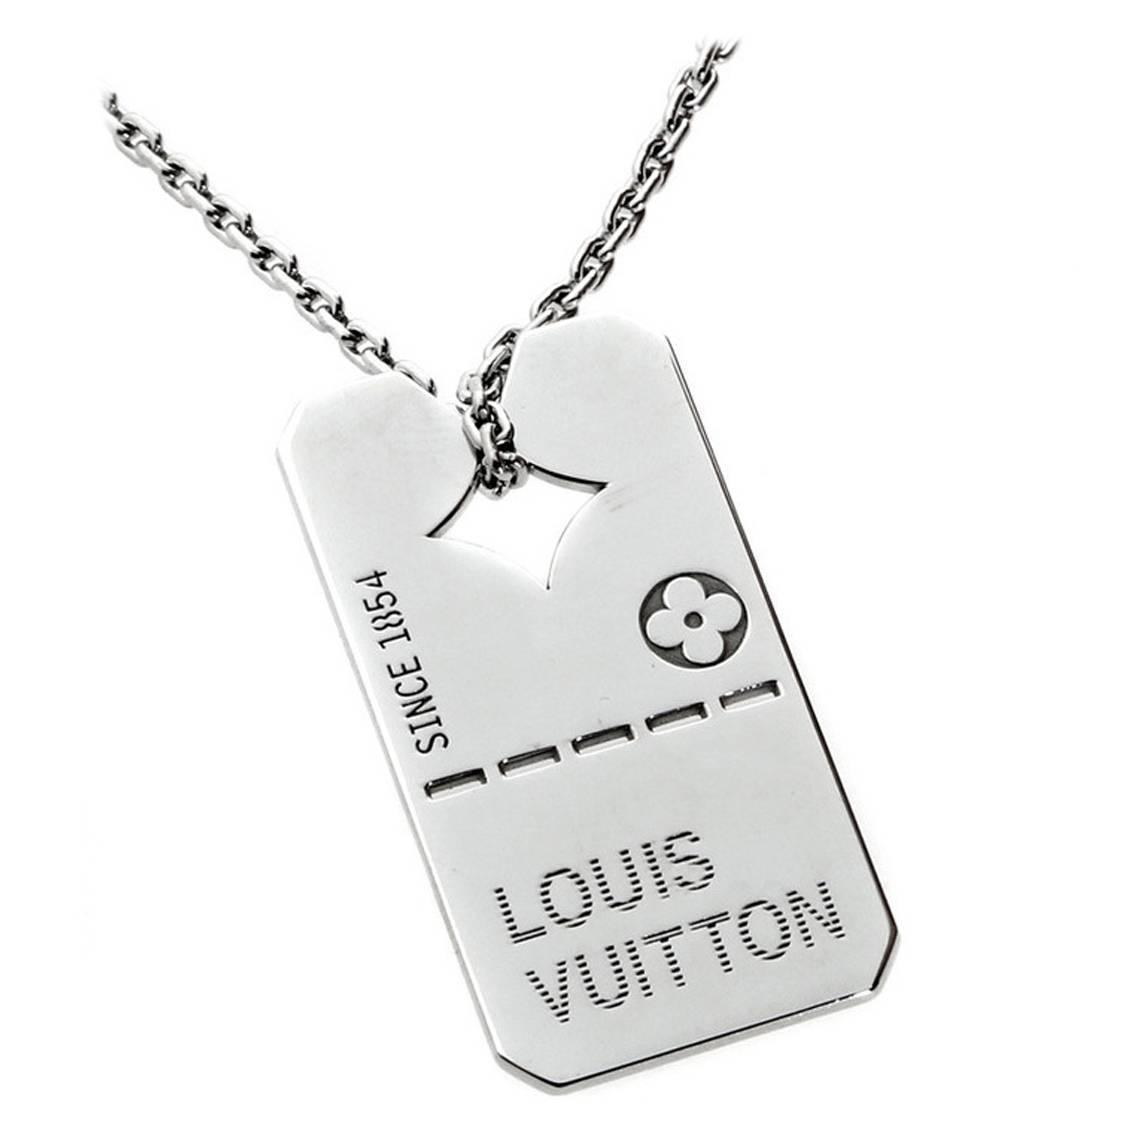 Louis Vuitton Gold Dog Tag Necklace For Sale at 1stdibs